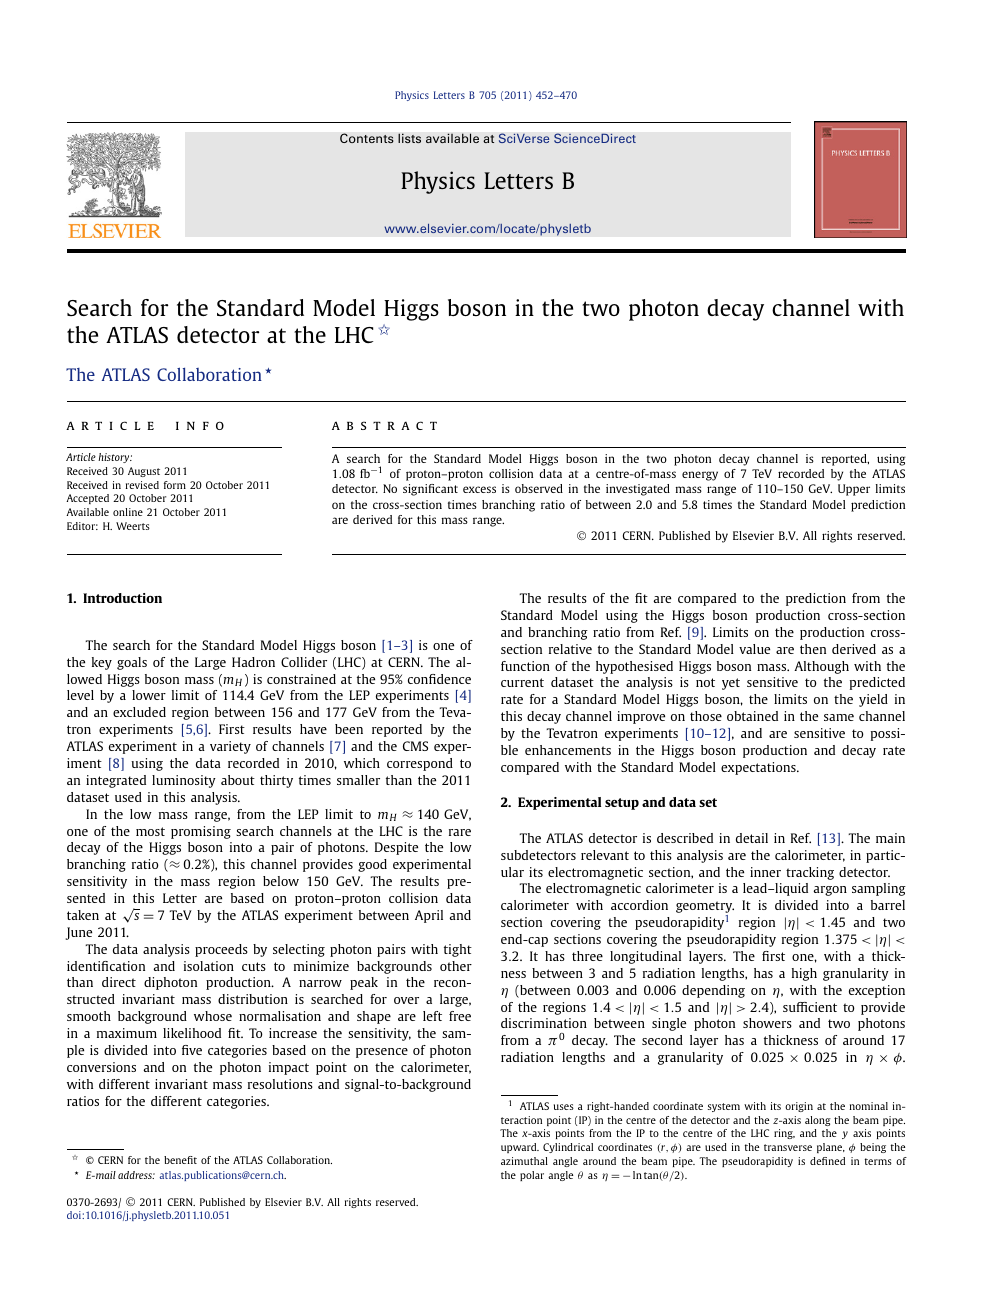 Search For The Standard Model Higgs Boson In The Two Photon Decay Channel With The Atlas Detector At The Lhc Topic Of Research Paper In Physical Sciences Download Scholarly Article Pdf